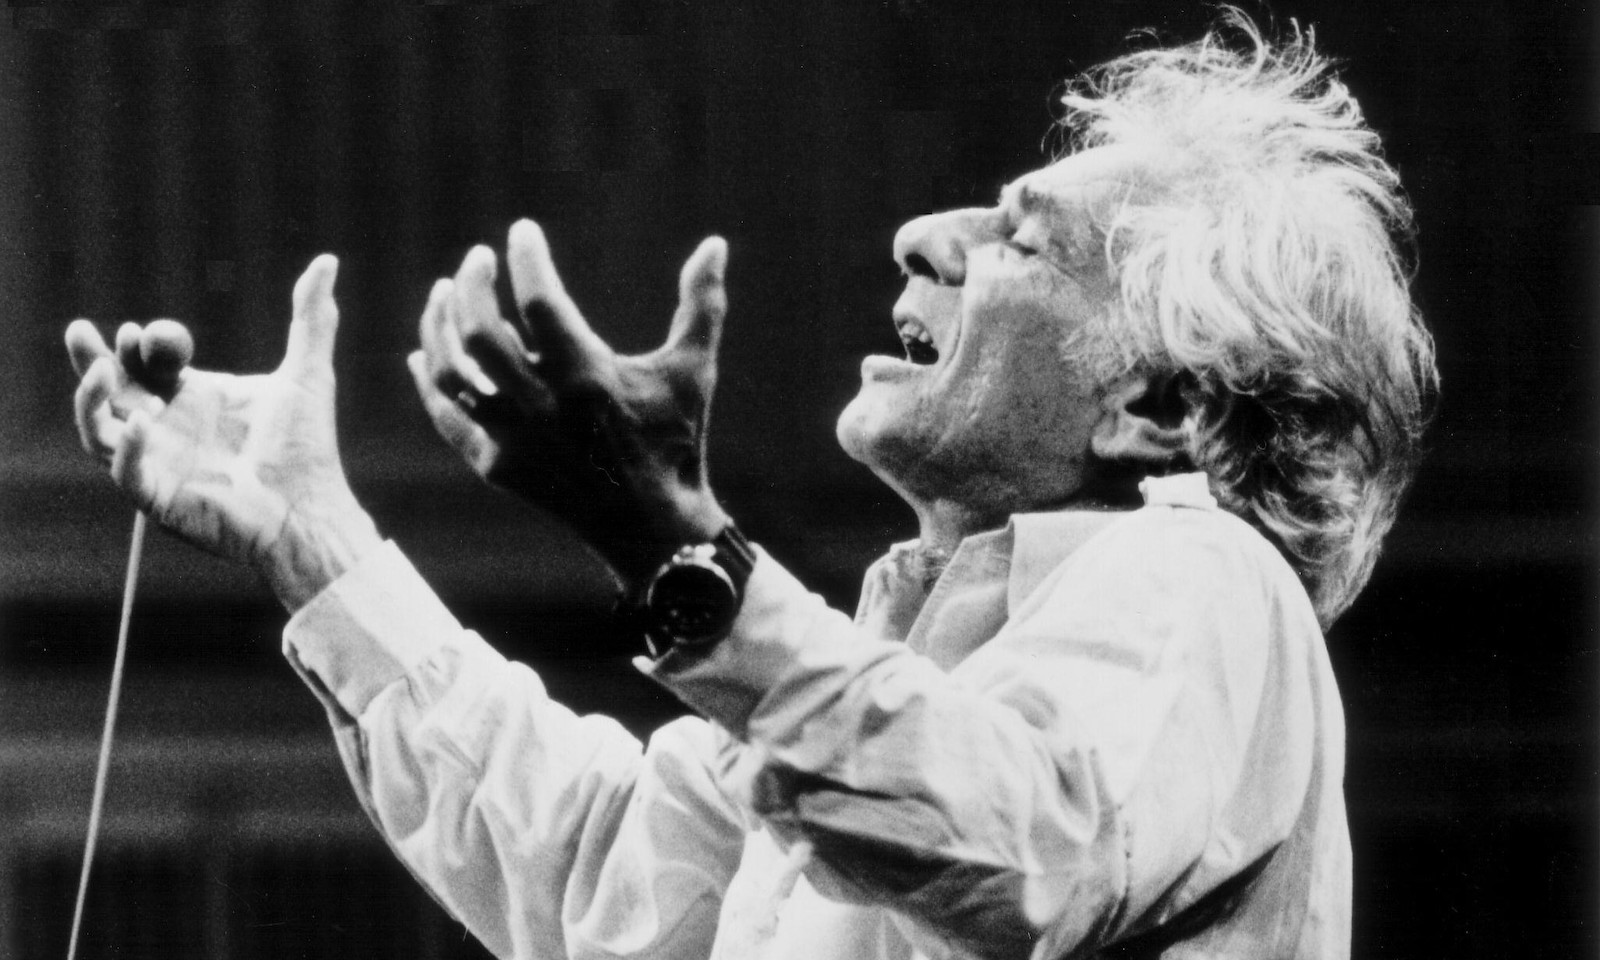 Moving Message of Freedom and Equality: Leonard Bernstein's "MASS" 